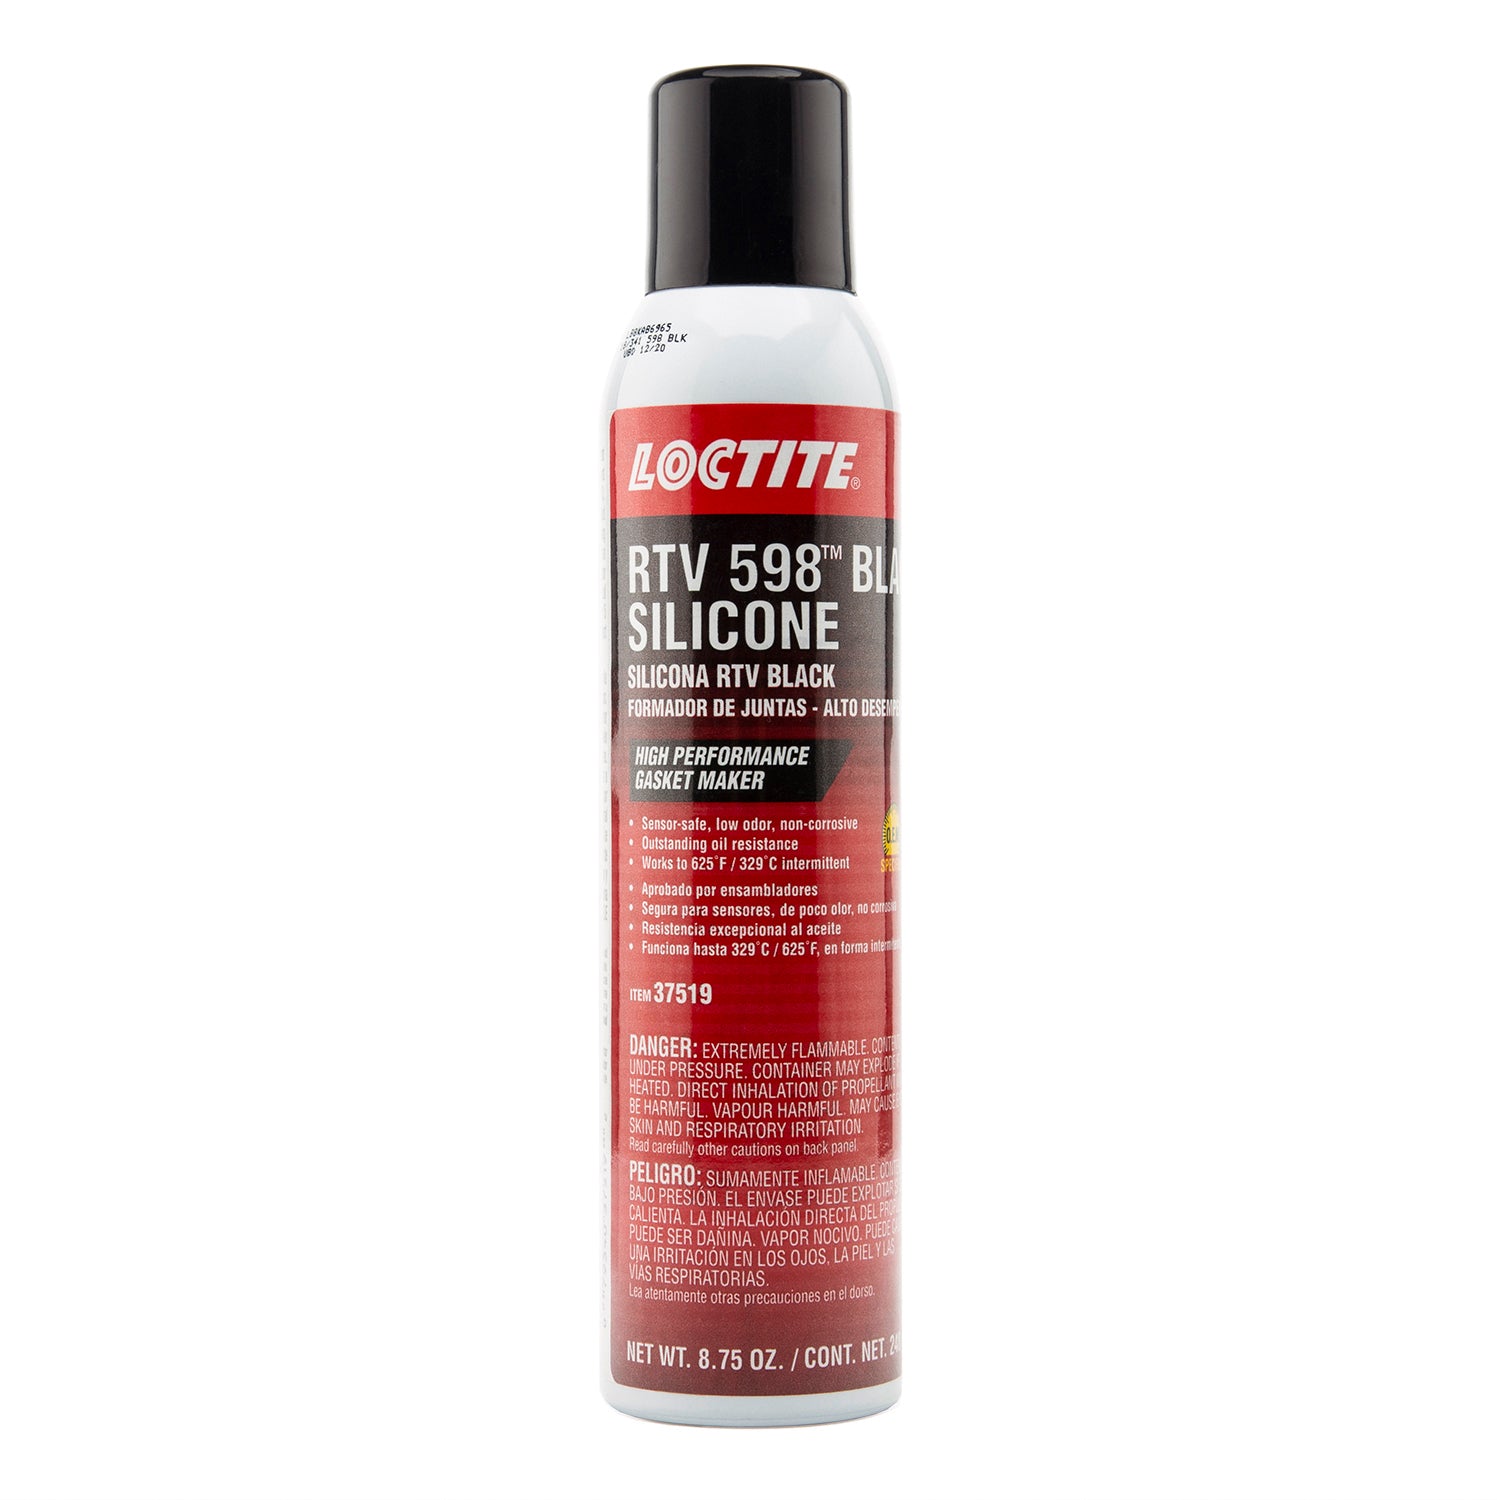 Loctite 598 RTV Black High Performance Silicone - 8.75 oz. can data-zoom=